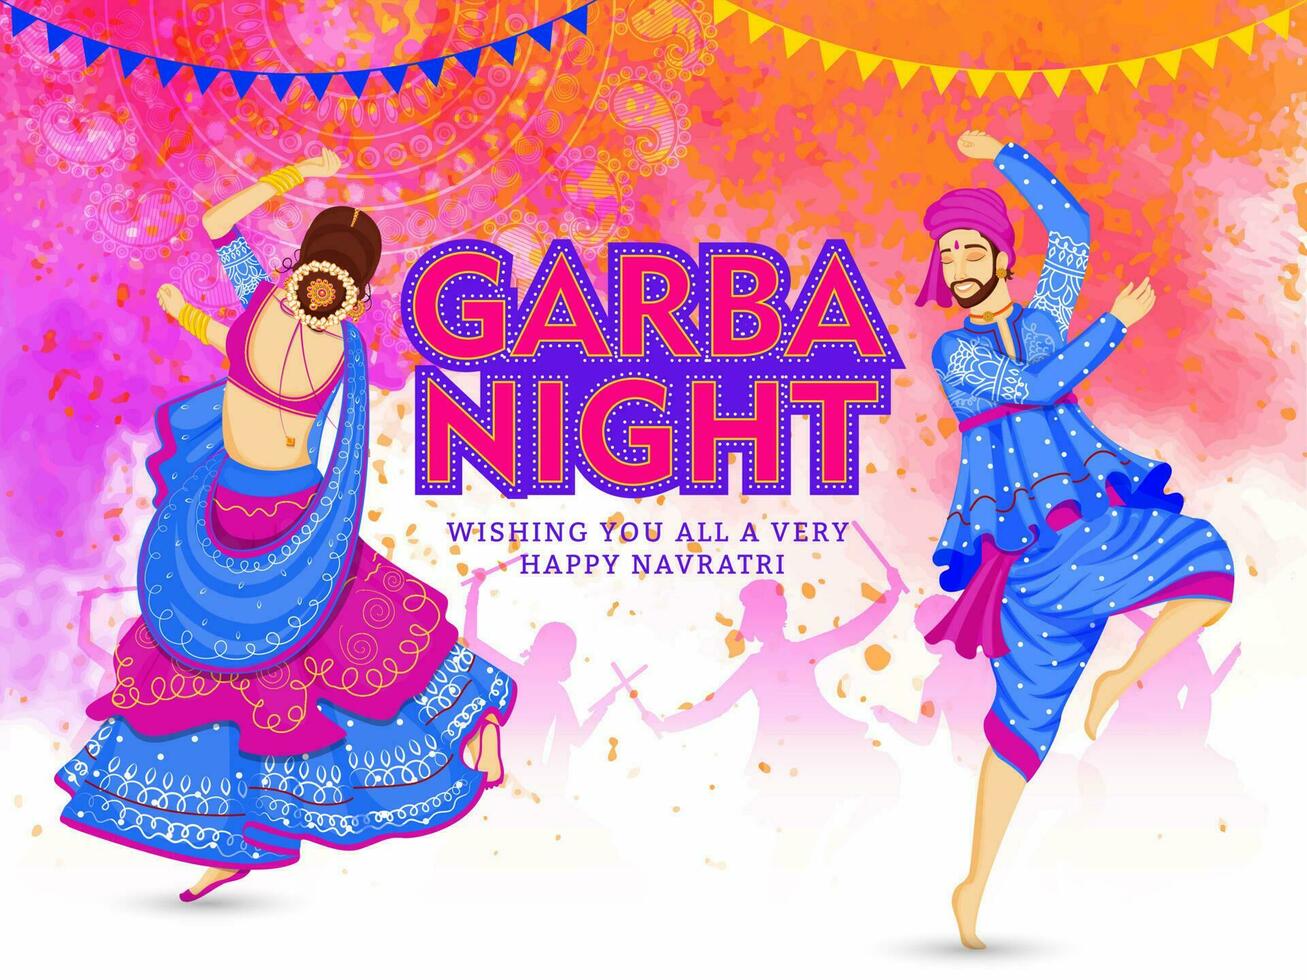 Garba Night party celebration poster or banner design, illustration of couple dancing on color splash background and text message Wishing You All A Very Happy Navratri. vector